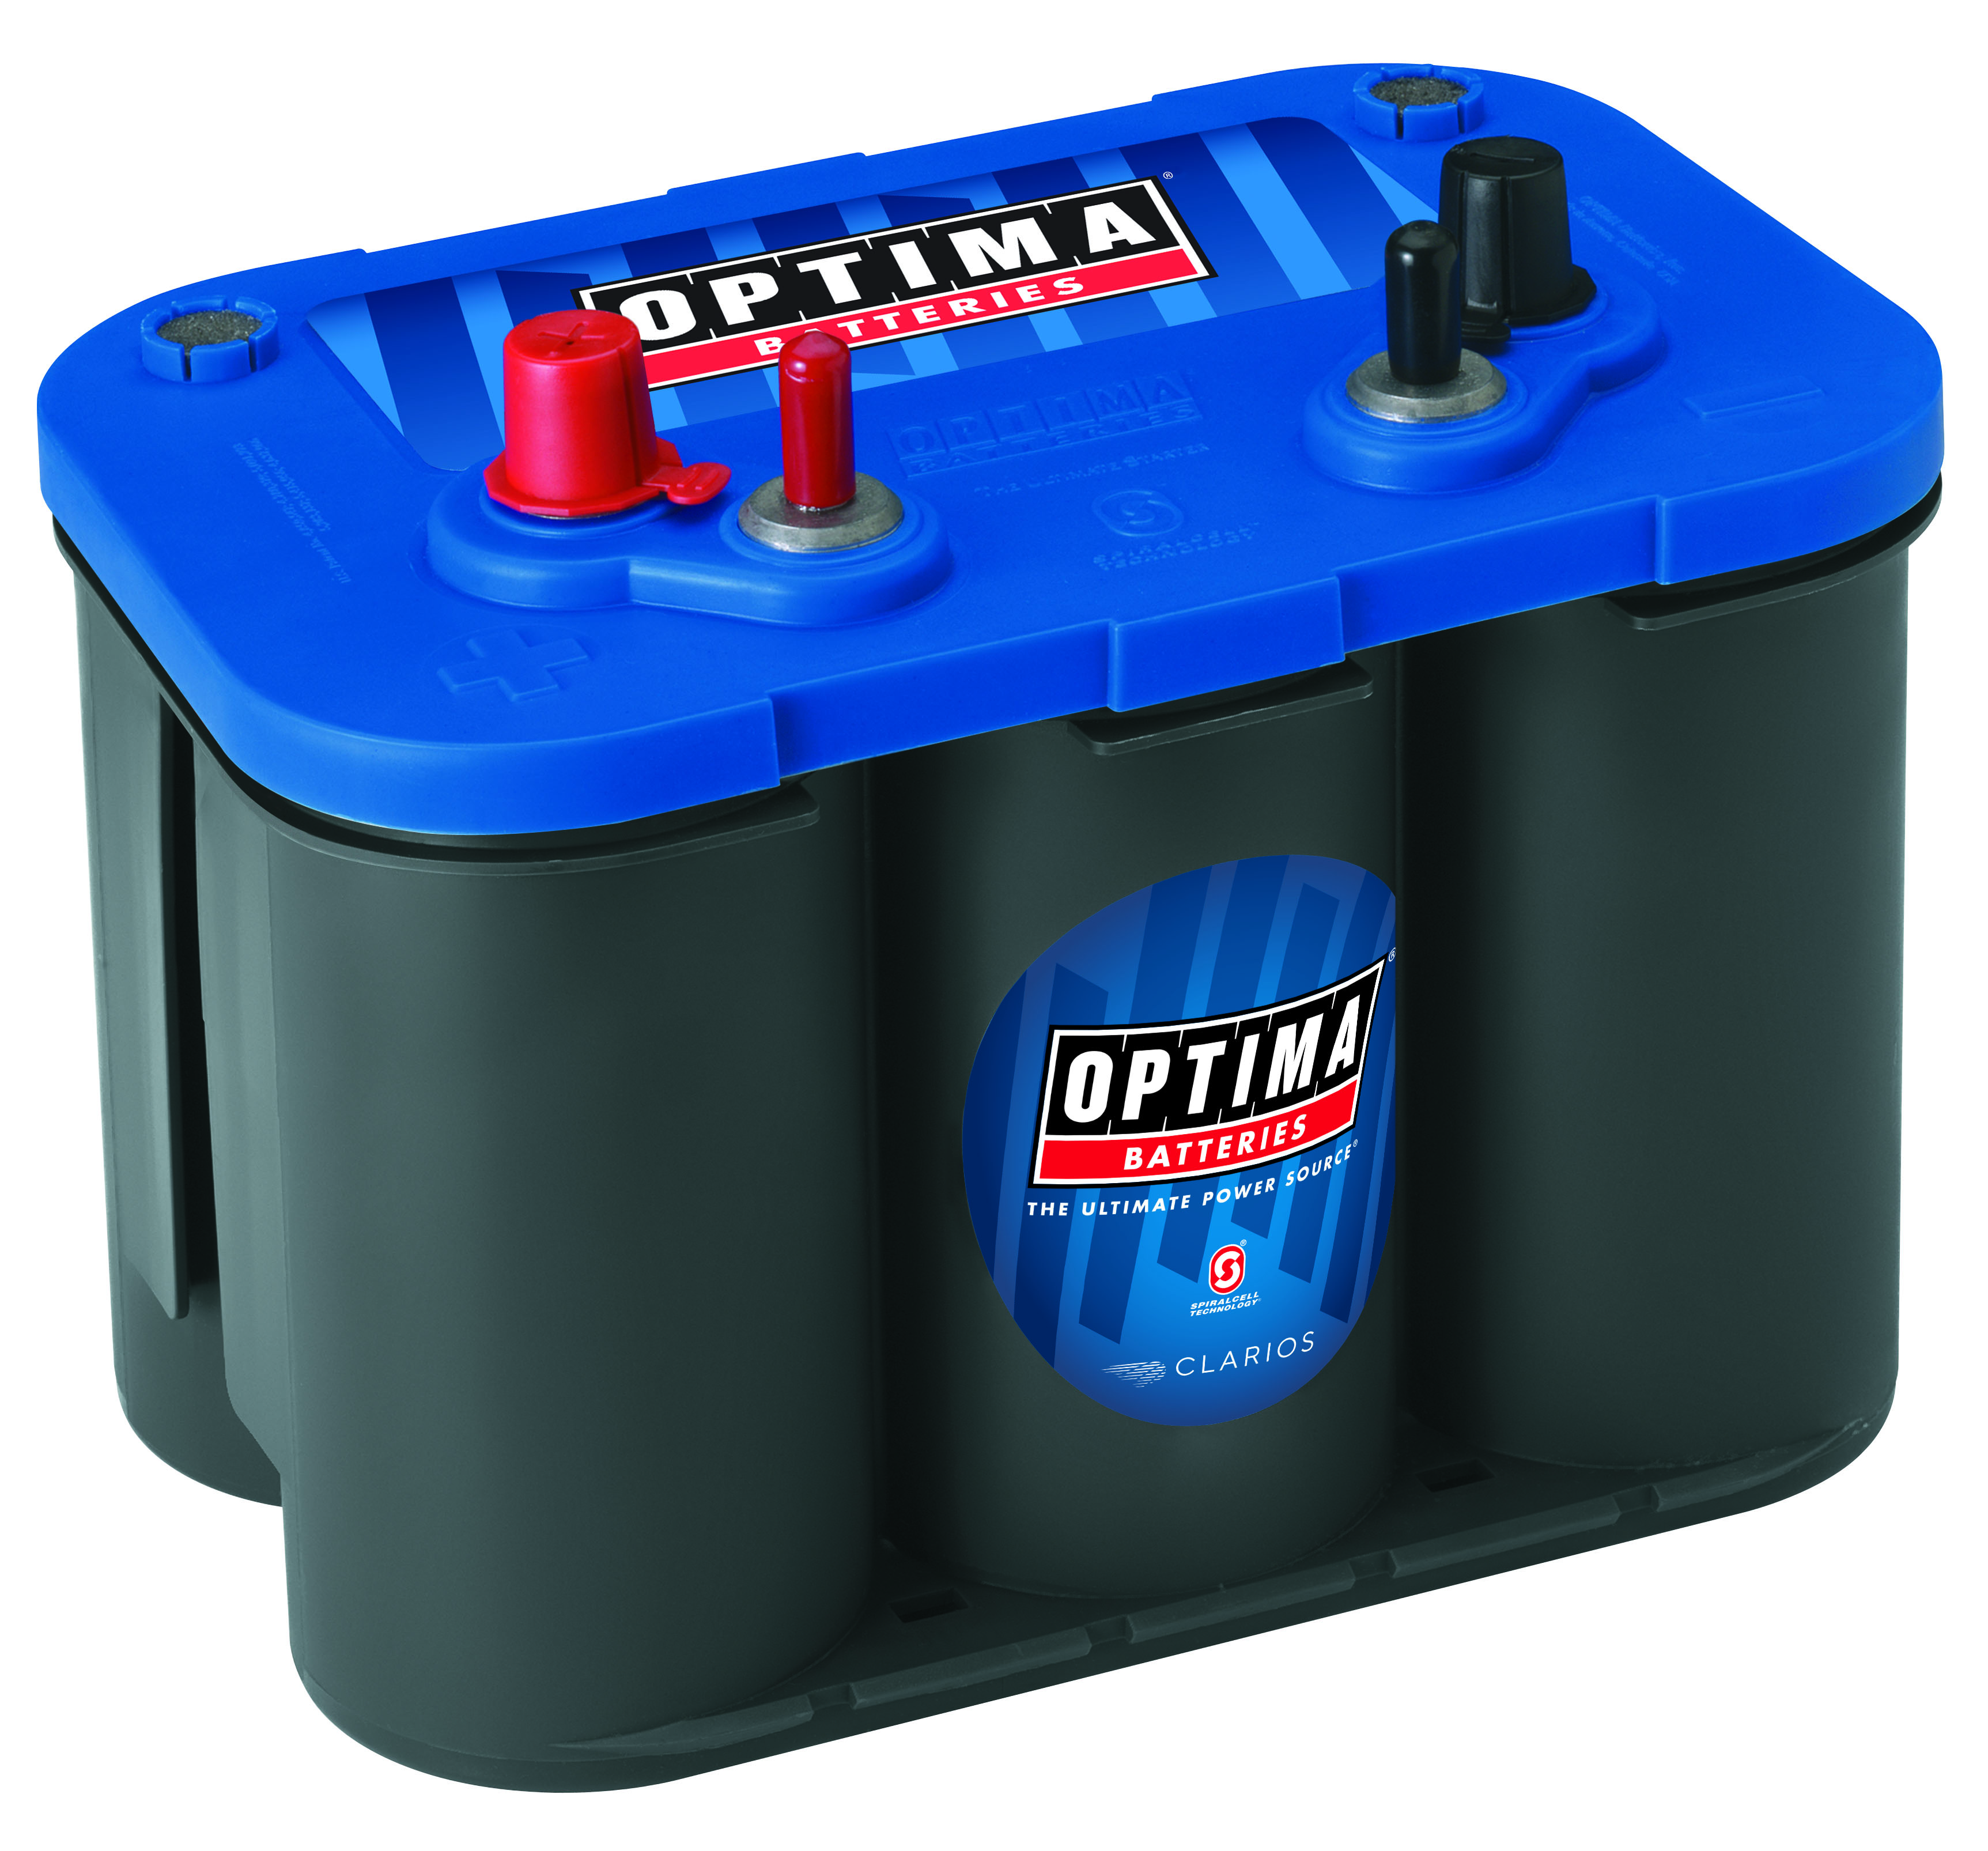 OPTIMA BlueTop AGM Spiralcell Marine Battery, Group Size 34M 12 Volt, 800 CCA - image 1 of 4